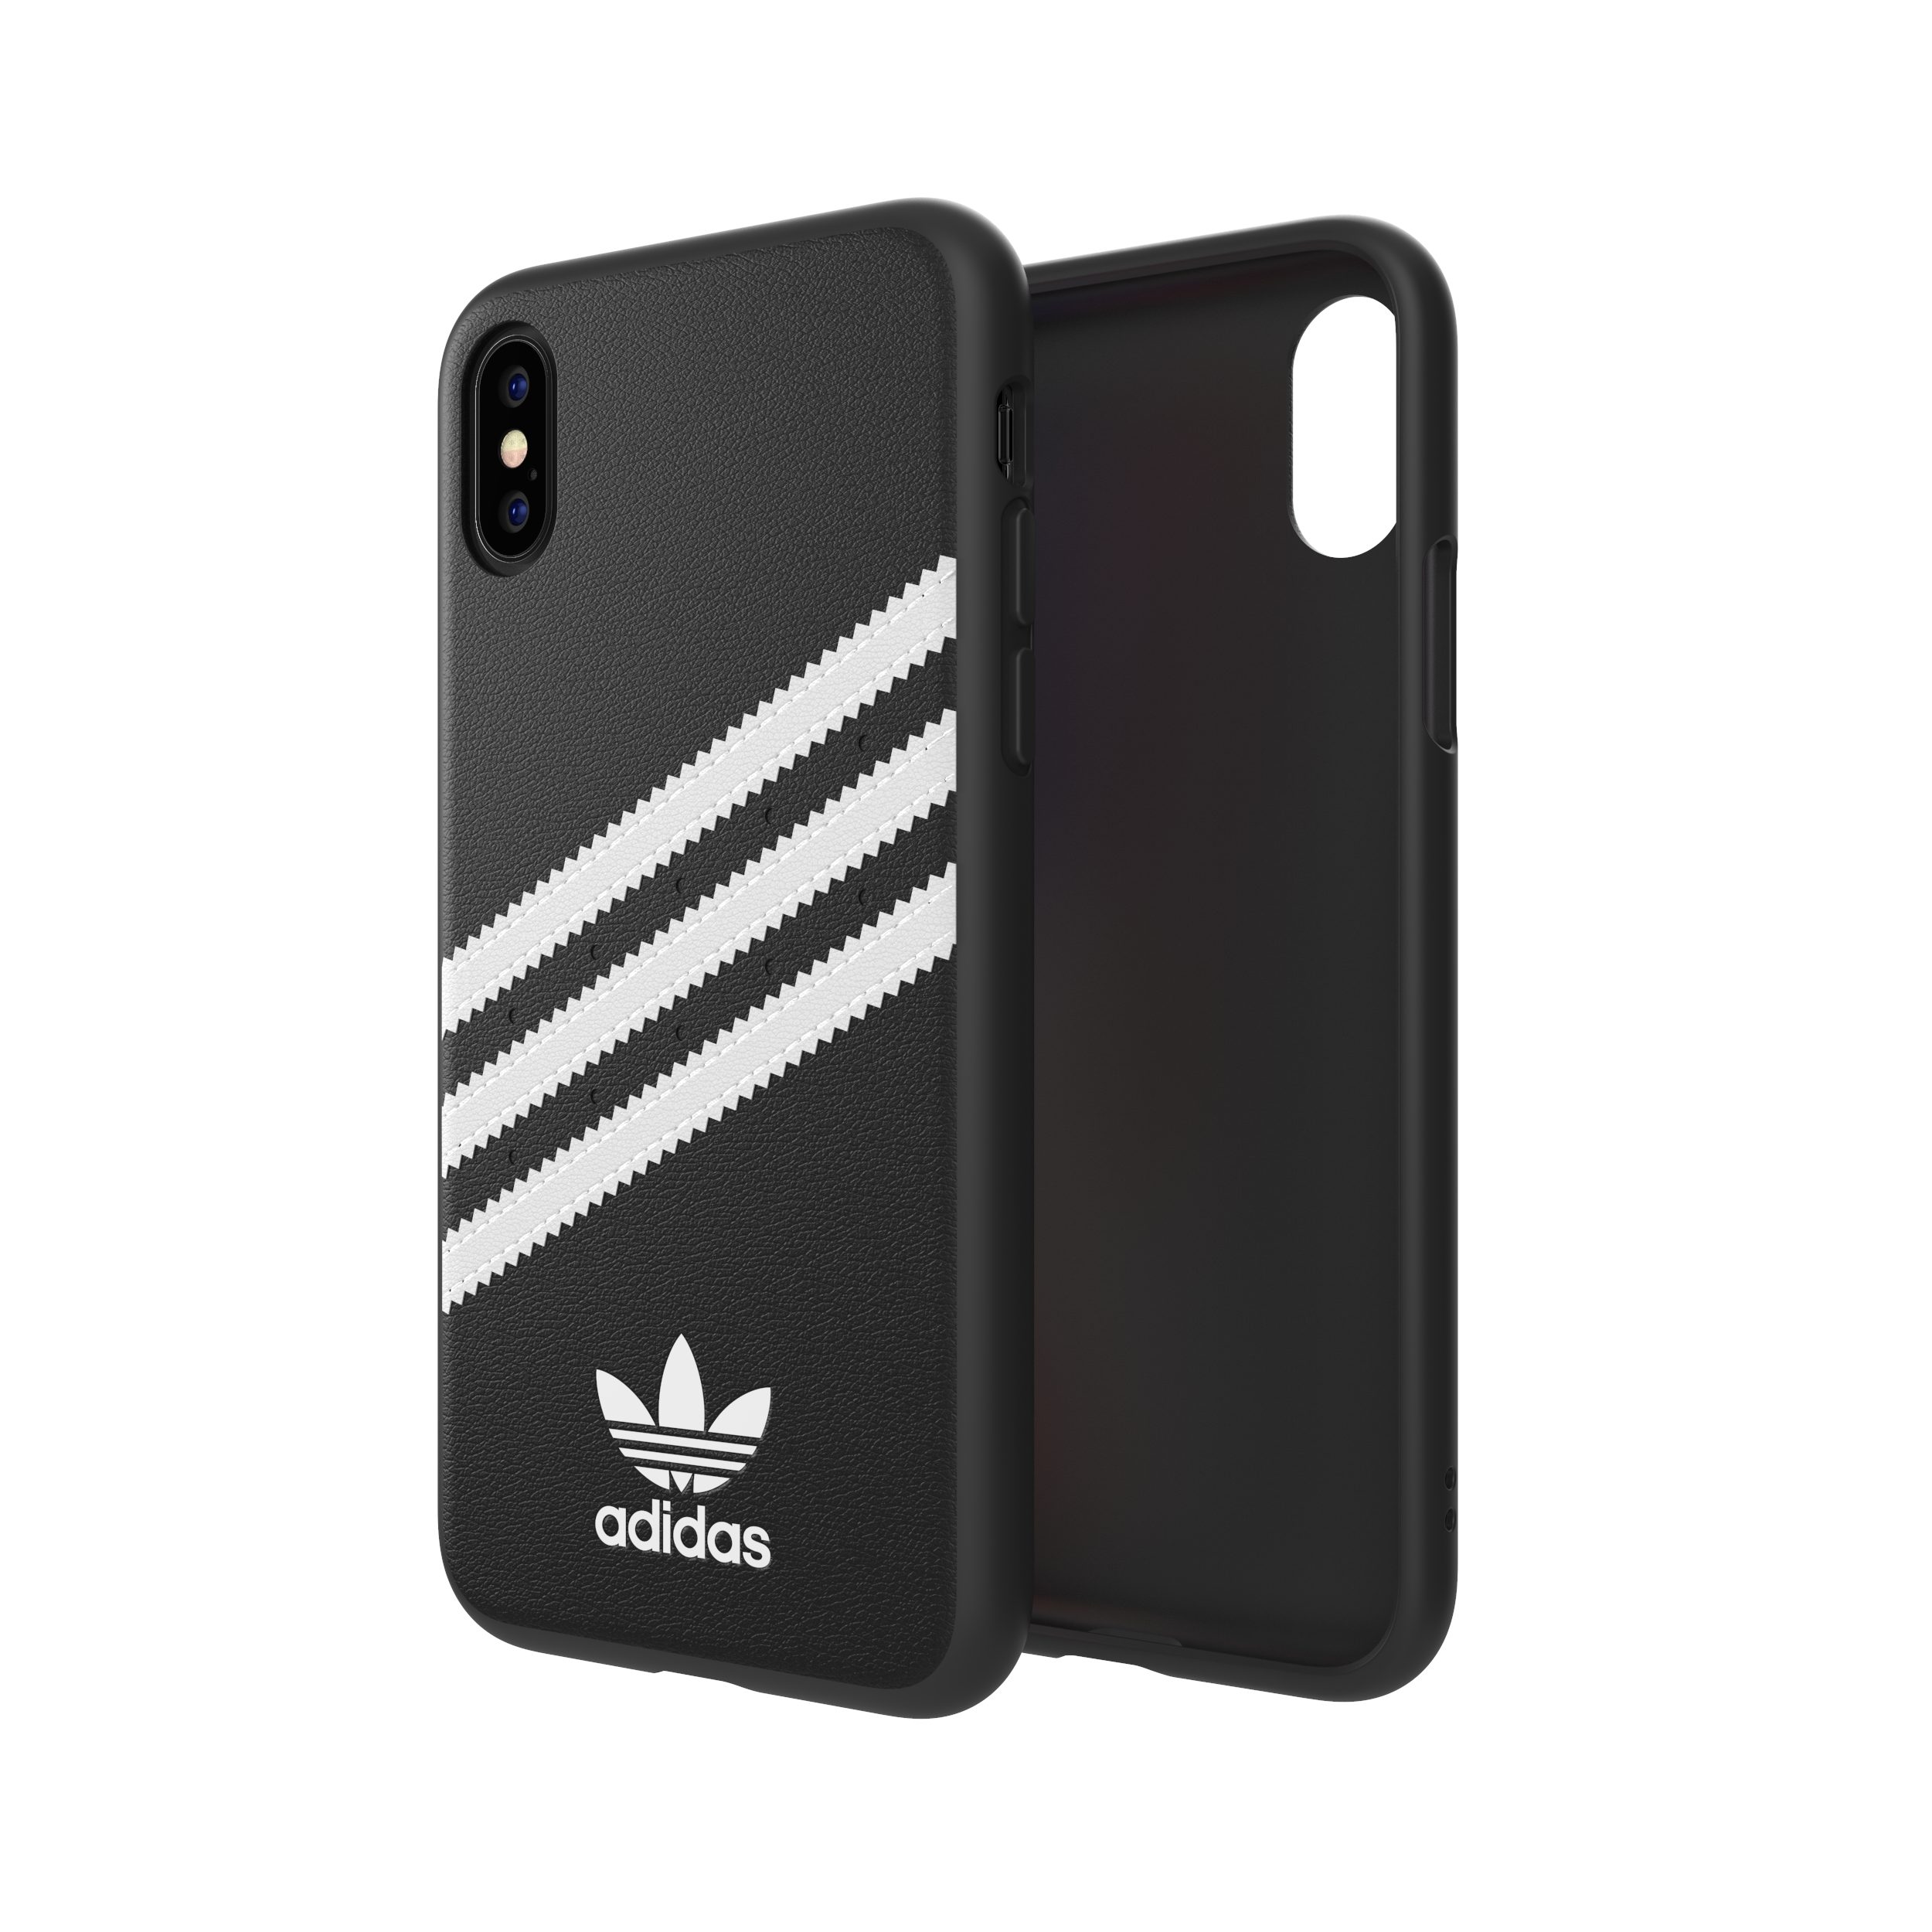 OR iPhone X/Xs for Case Backcover Moulded adidas PU adidas Originals